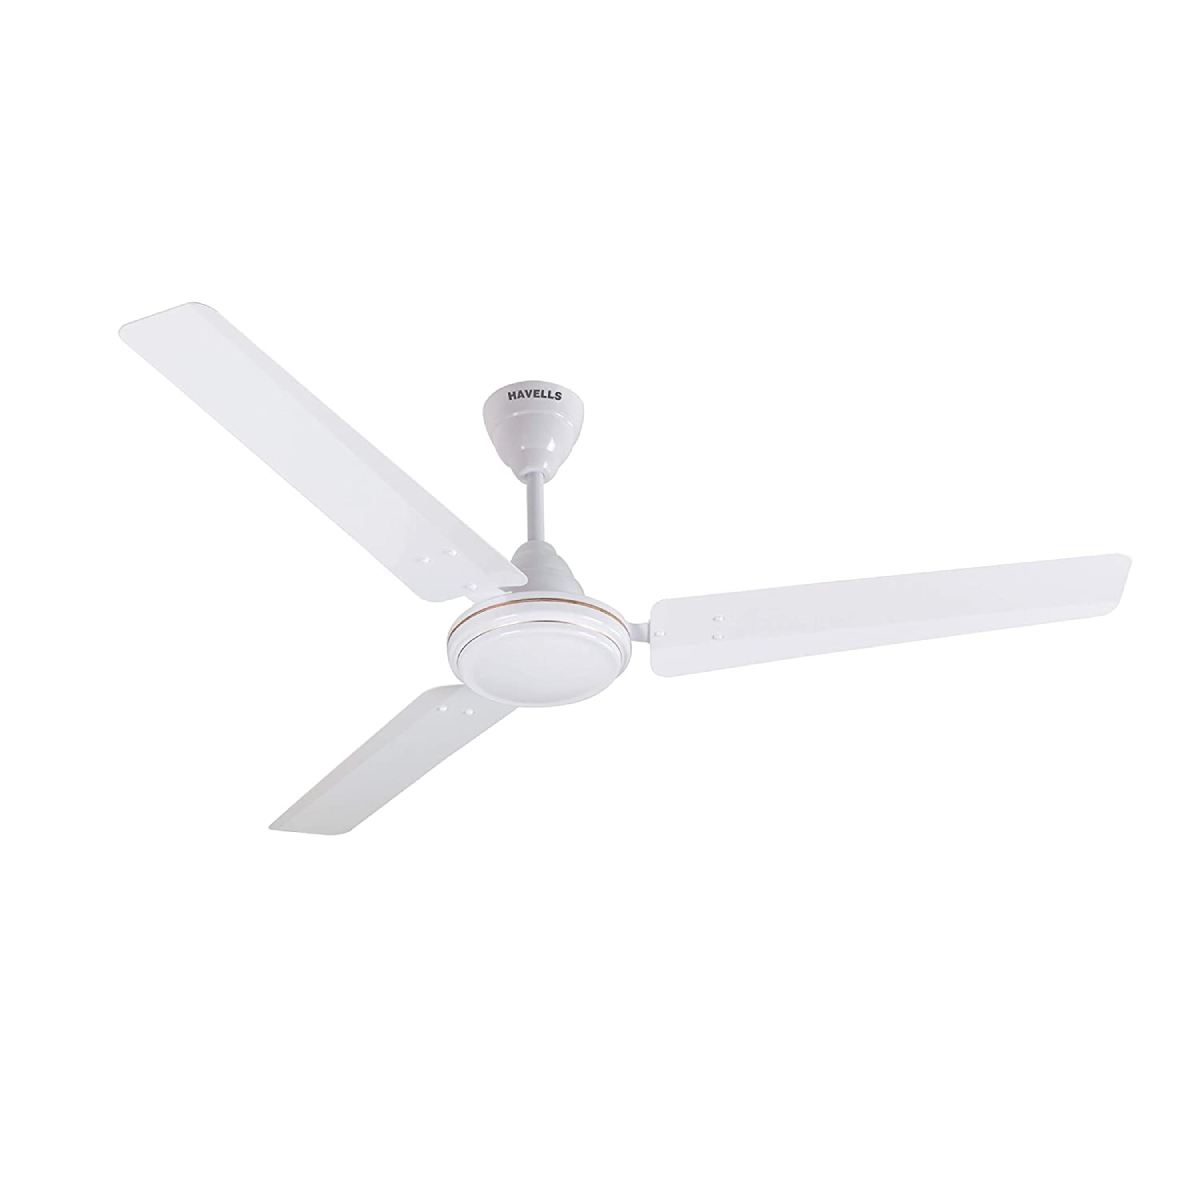 Havells 1200 mm Pacer Ceiling Fan